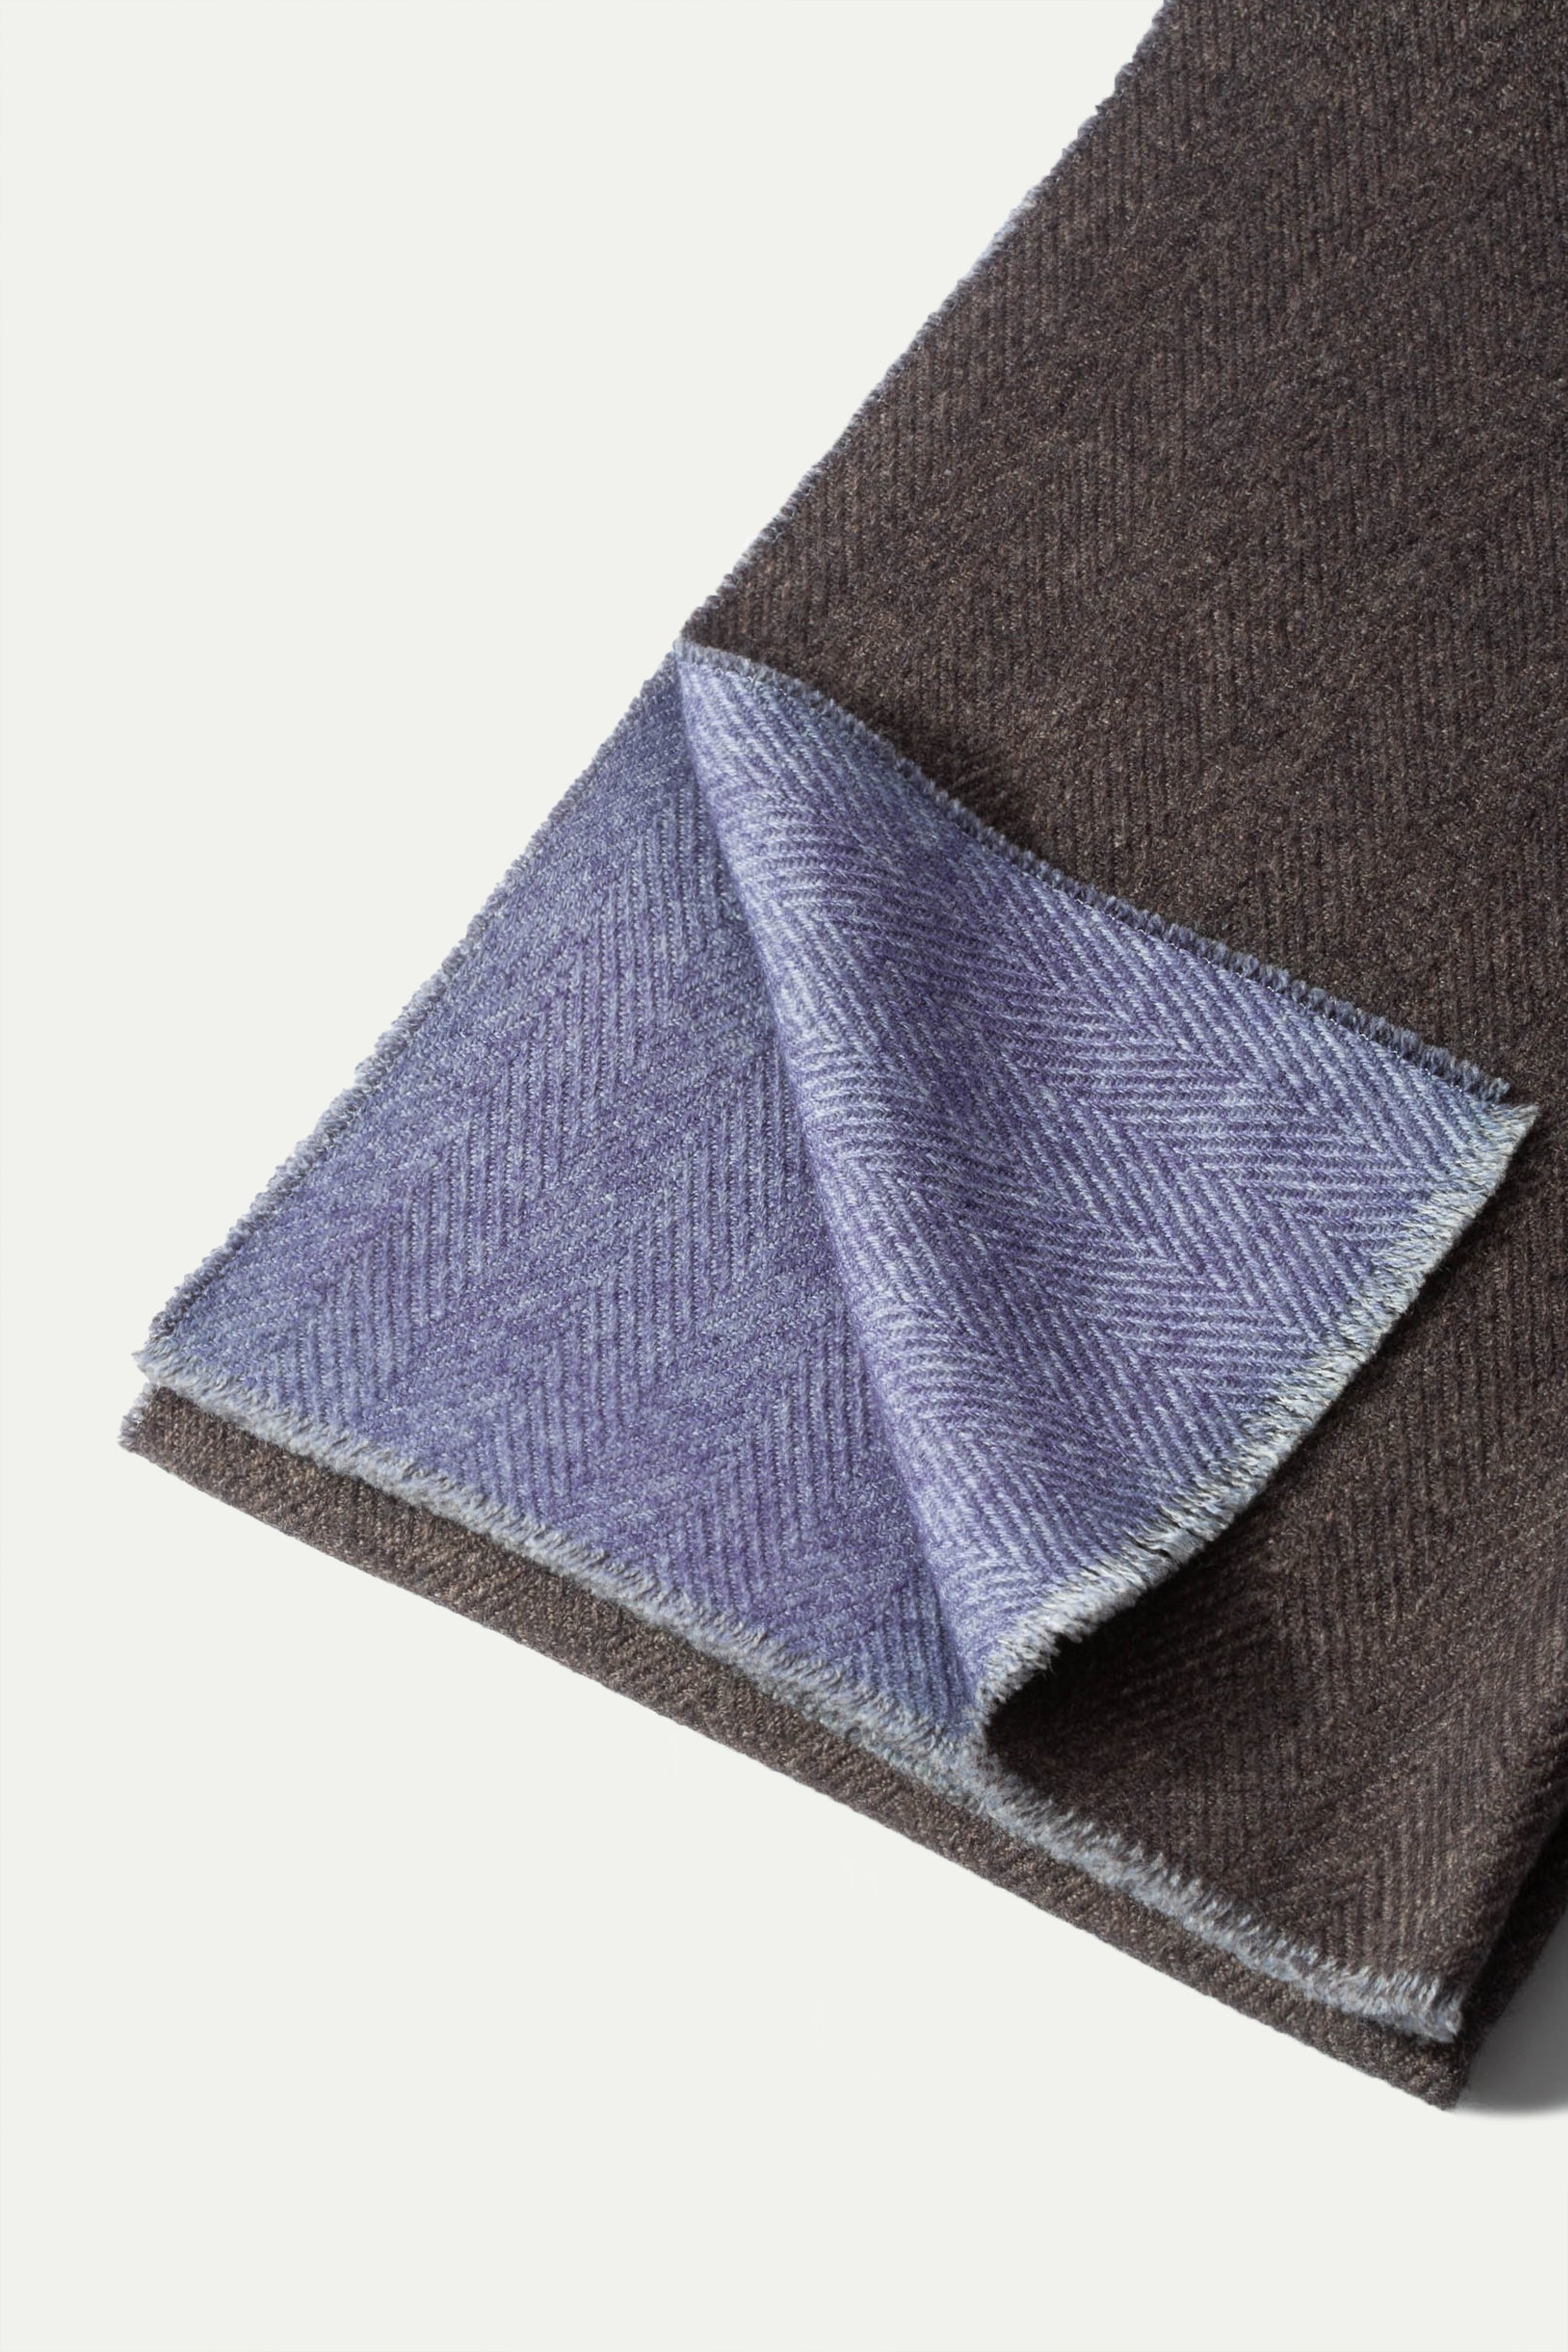 Brown and light blue reversible herringbone scarf - Made in Italy